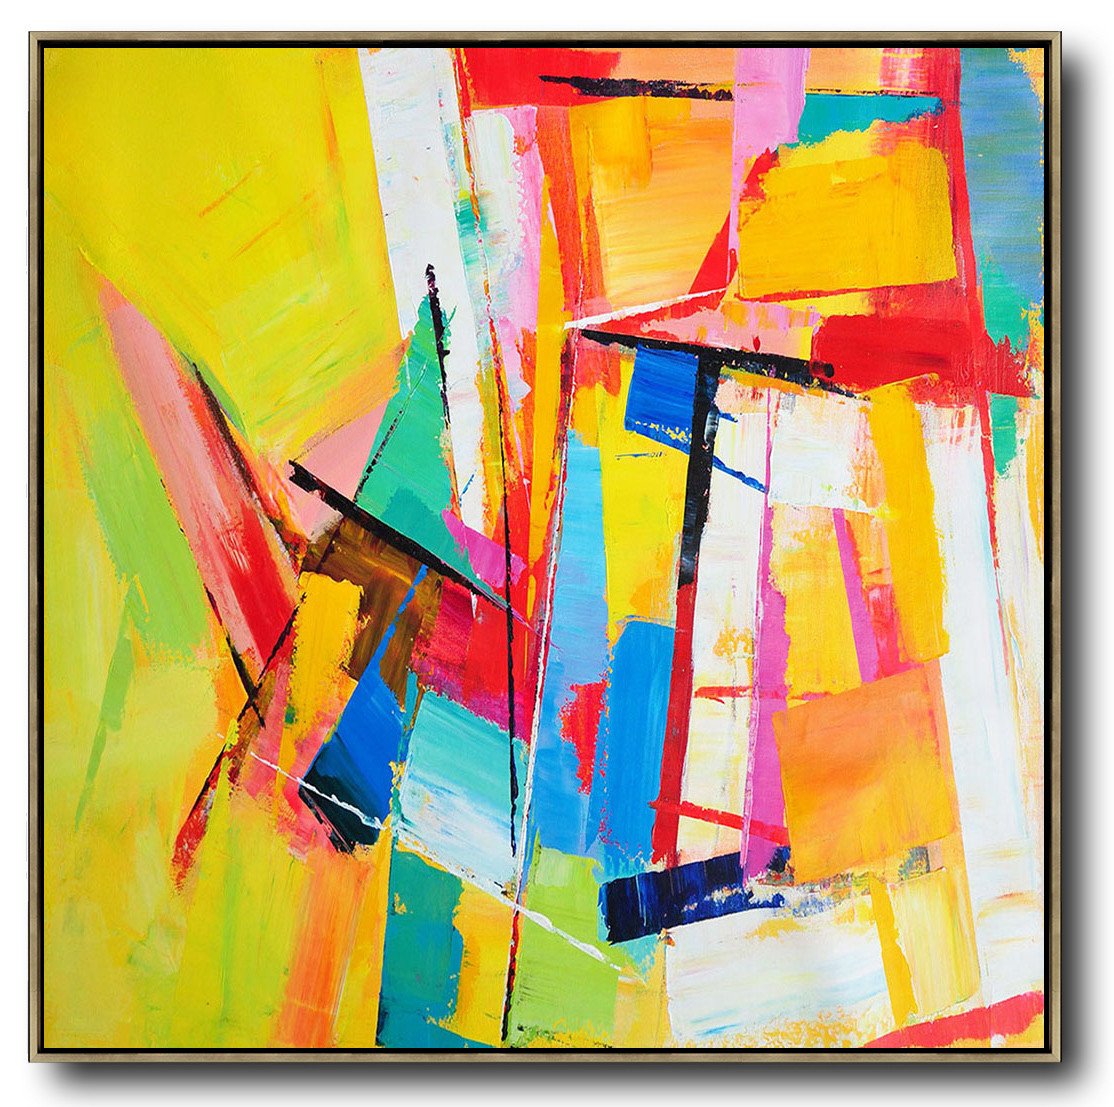 Hand-painted oversized Palette Knife Painting Contemporary Art on canvas, large square canvas art - Abstract Portraits Huge